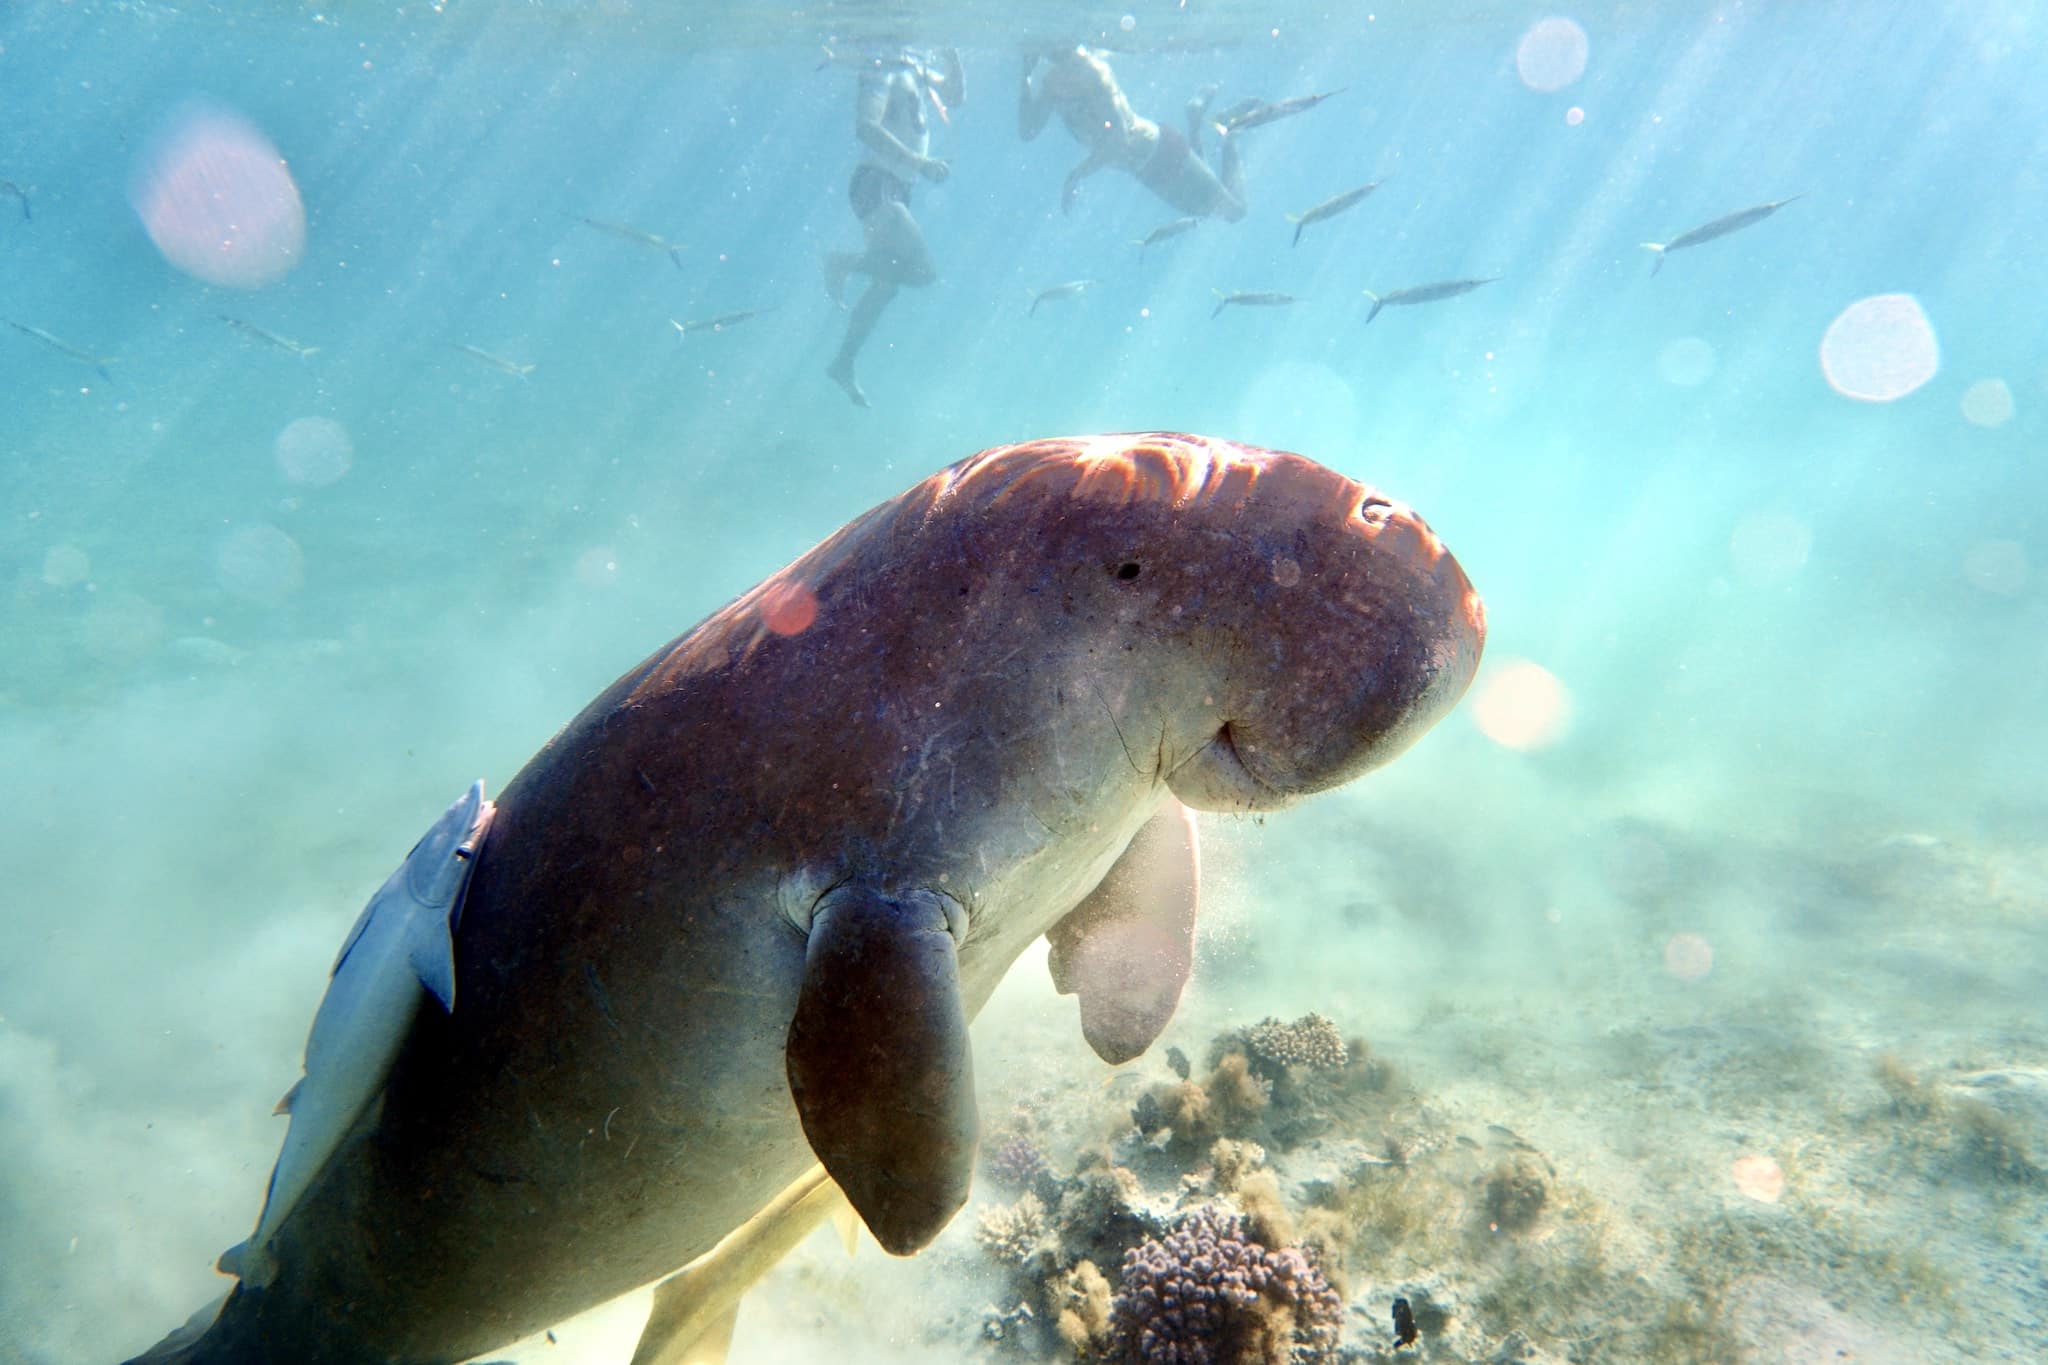 Manatee in Egypt Experience Report – Snorkeling with the Dugong from Marsa Alam